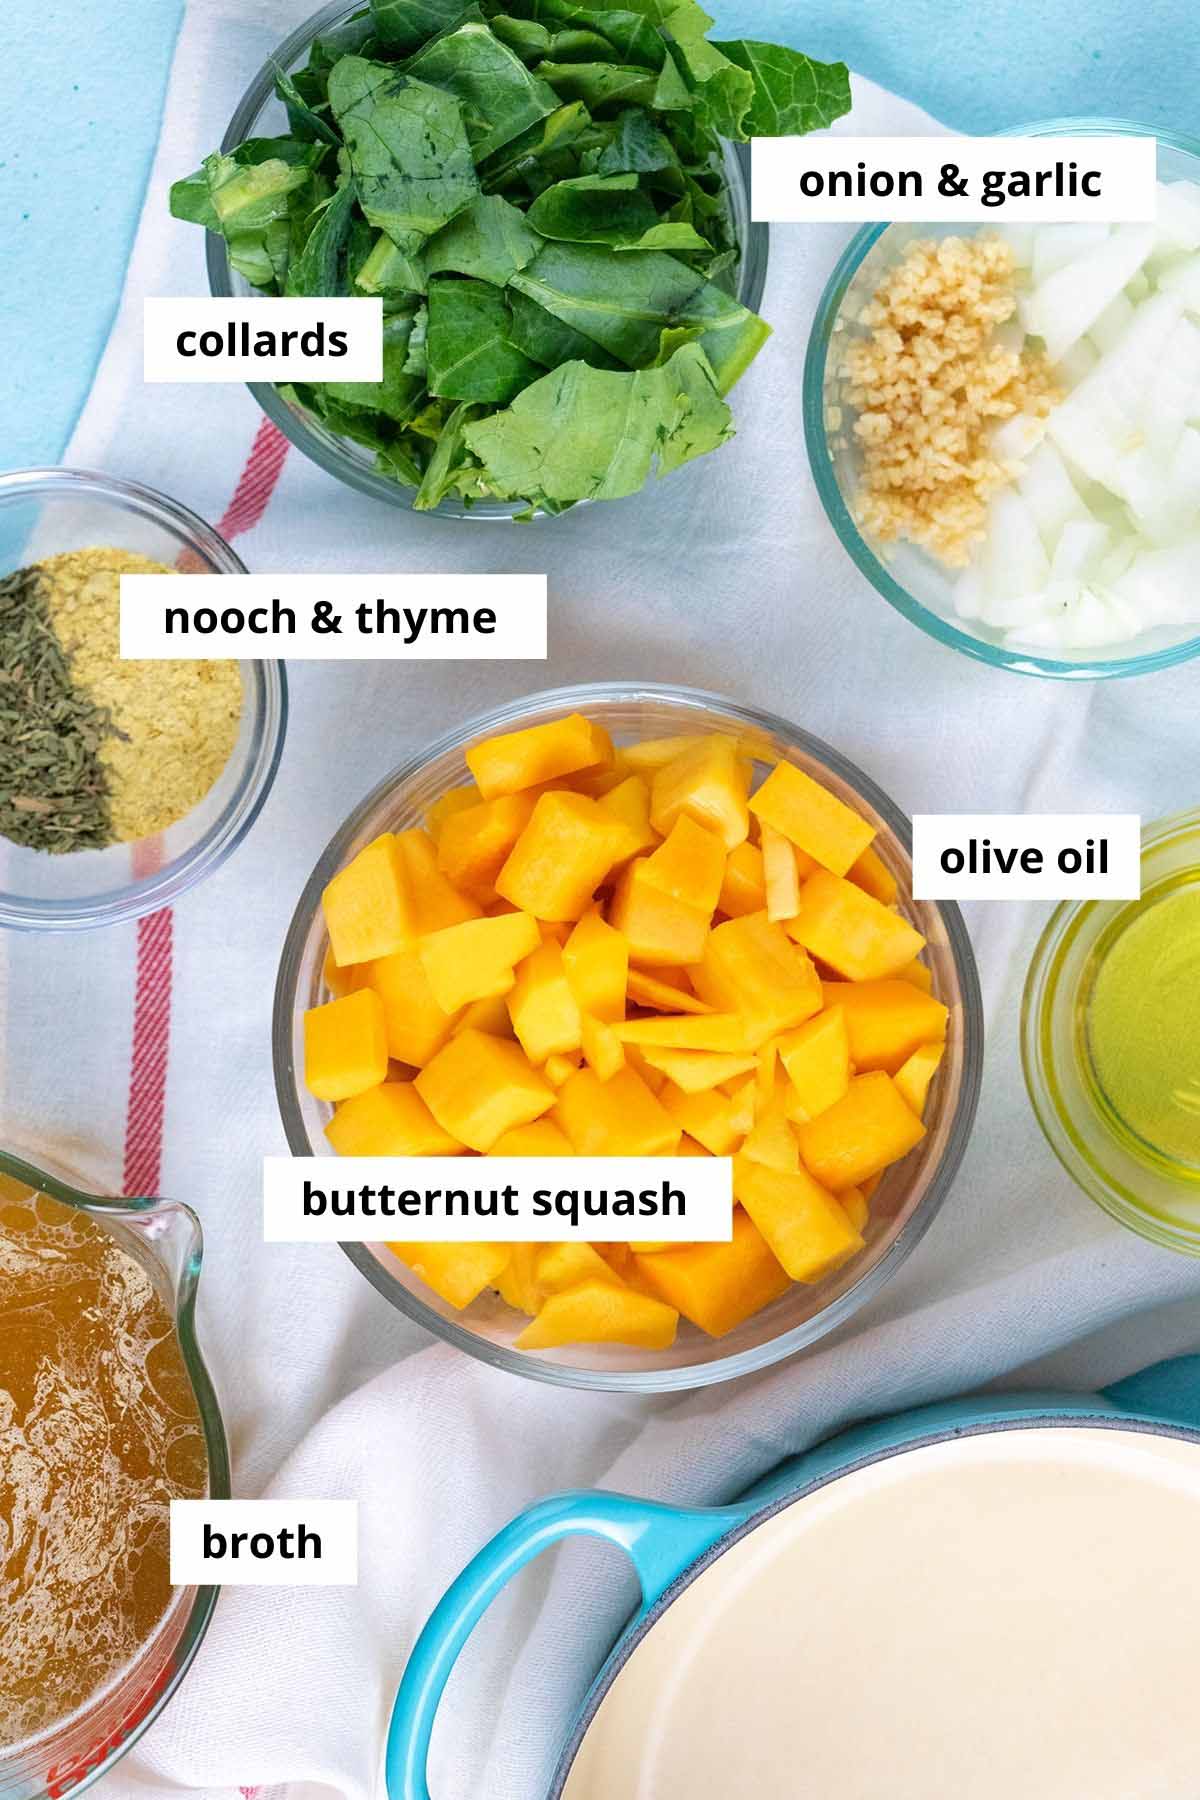 labeled ingredients for butternut squash soup